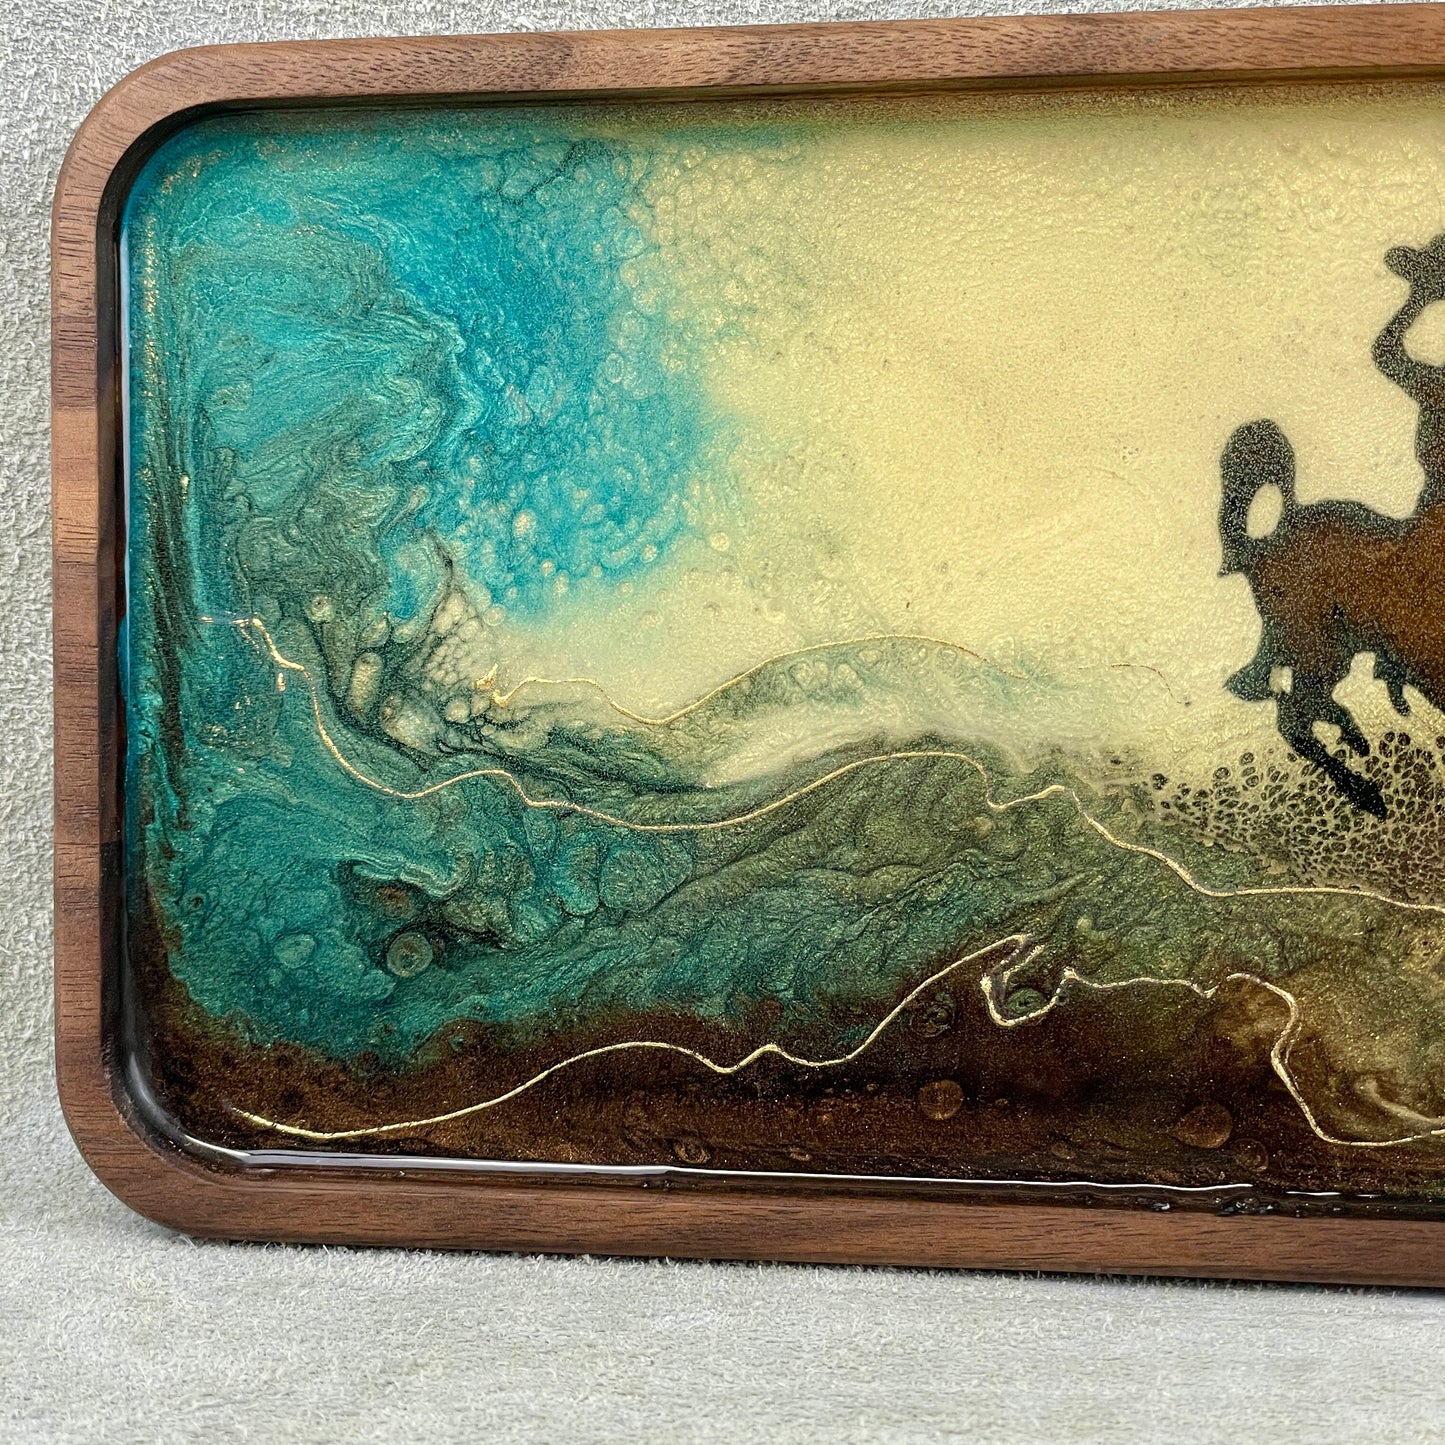 Wyoming Cowboy Walnut Wood and Resin with 24K Gold Tray